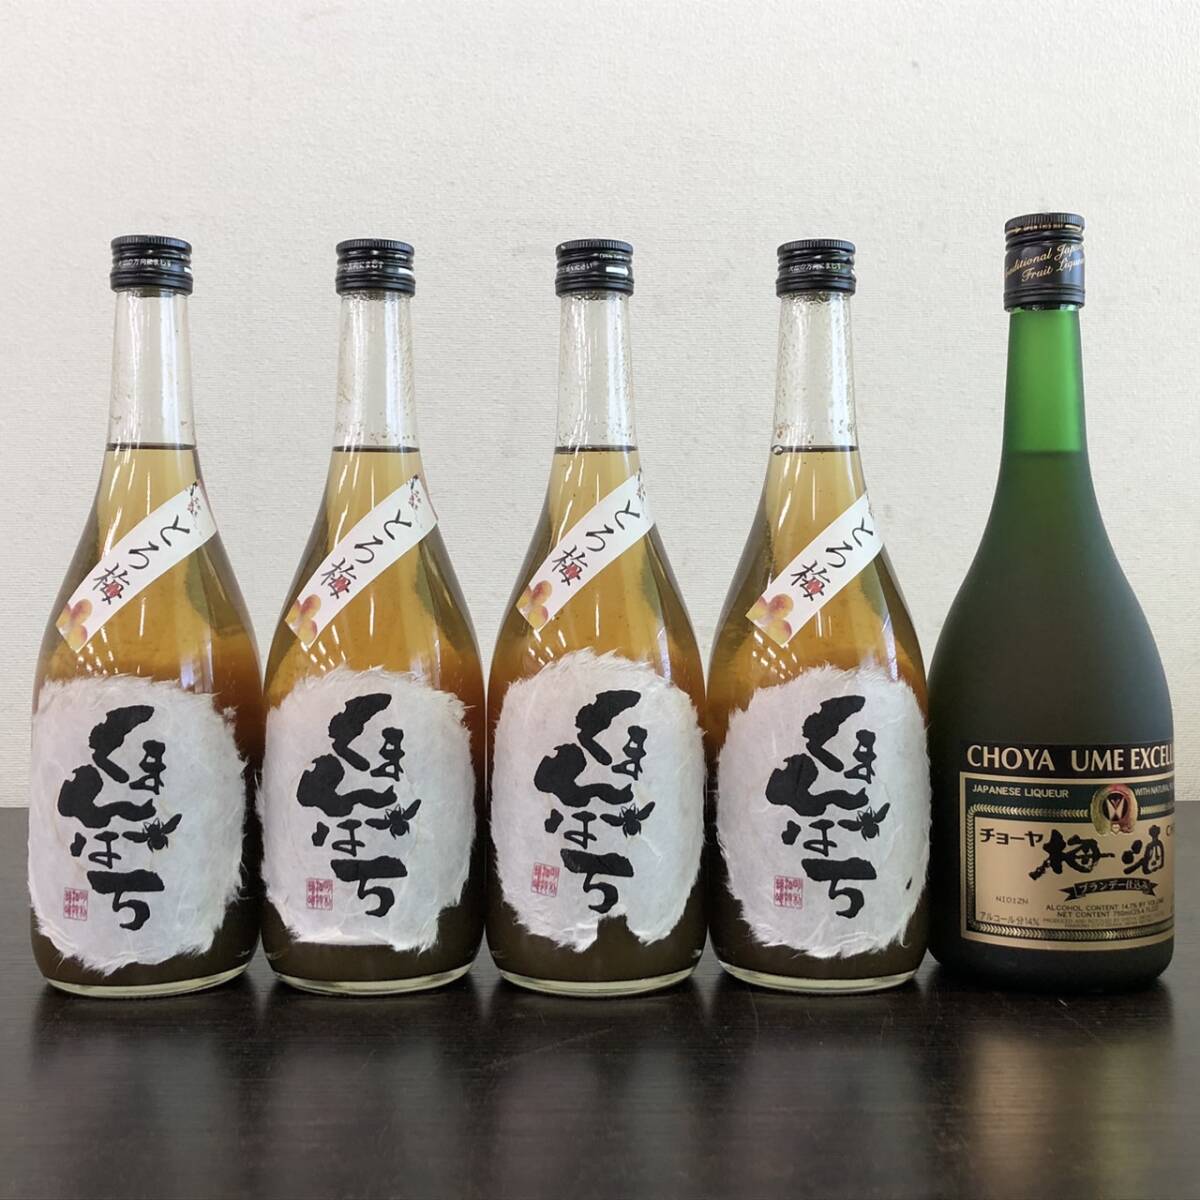 Y035(6065)-147[ Aichi prefecture only shipping, including in a package un- possible ] sake 5 point summarize classical plum wine Akira profit sake kind ....... plum / CHOYA plum wine brandy . included 